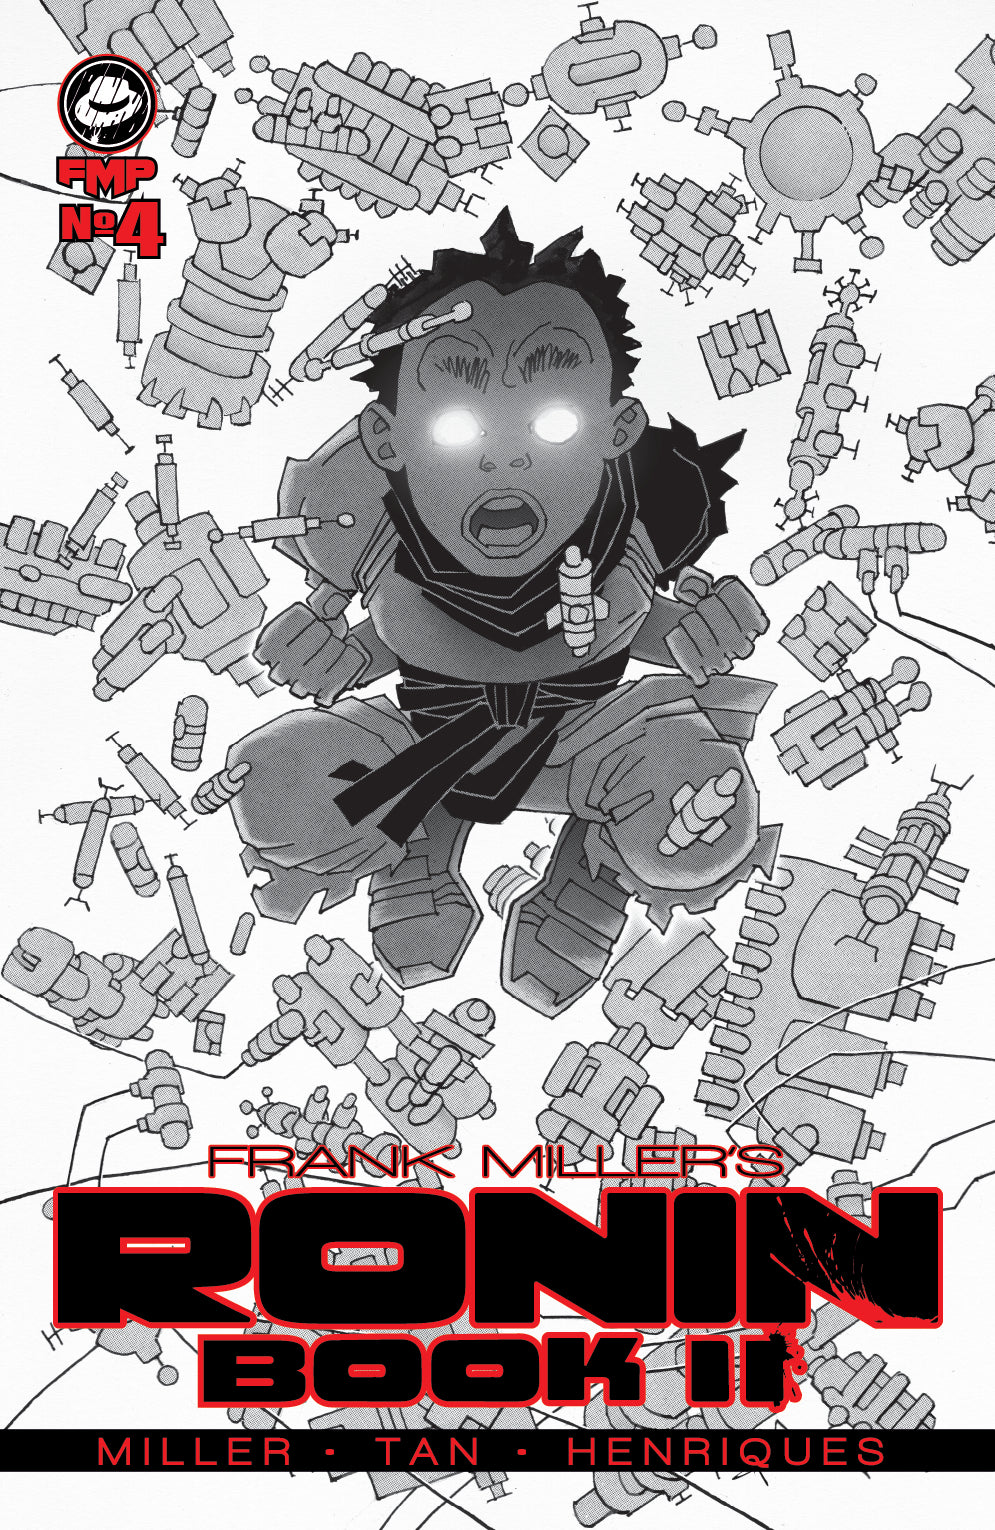 FRANK MILLERS RONIN BOOK TWO #4 (OF 6) CVR A TAN (MR)